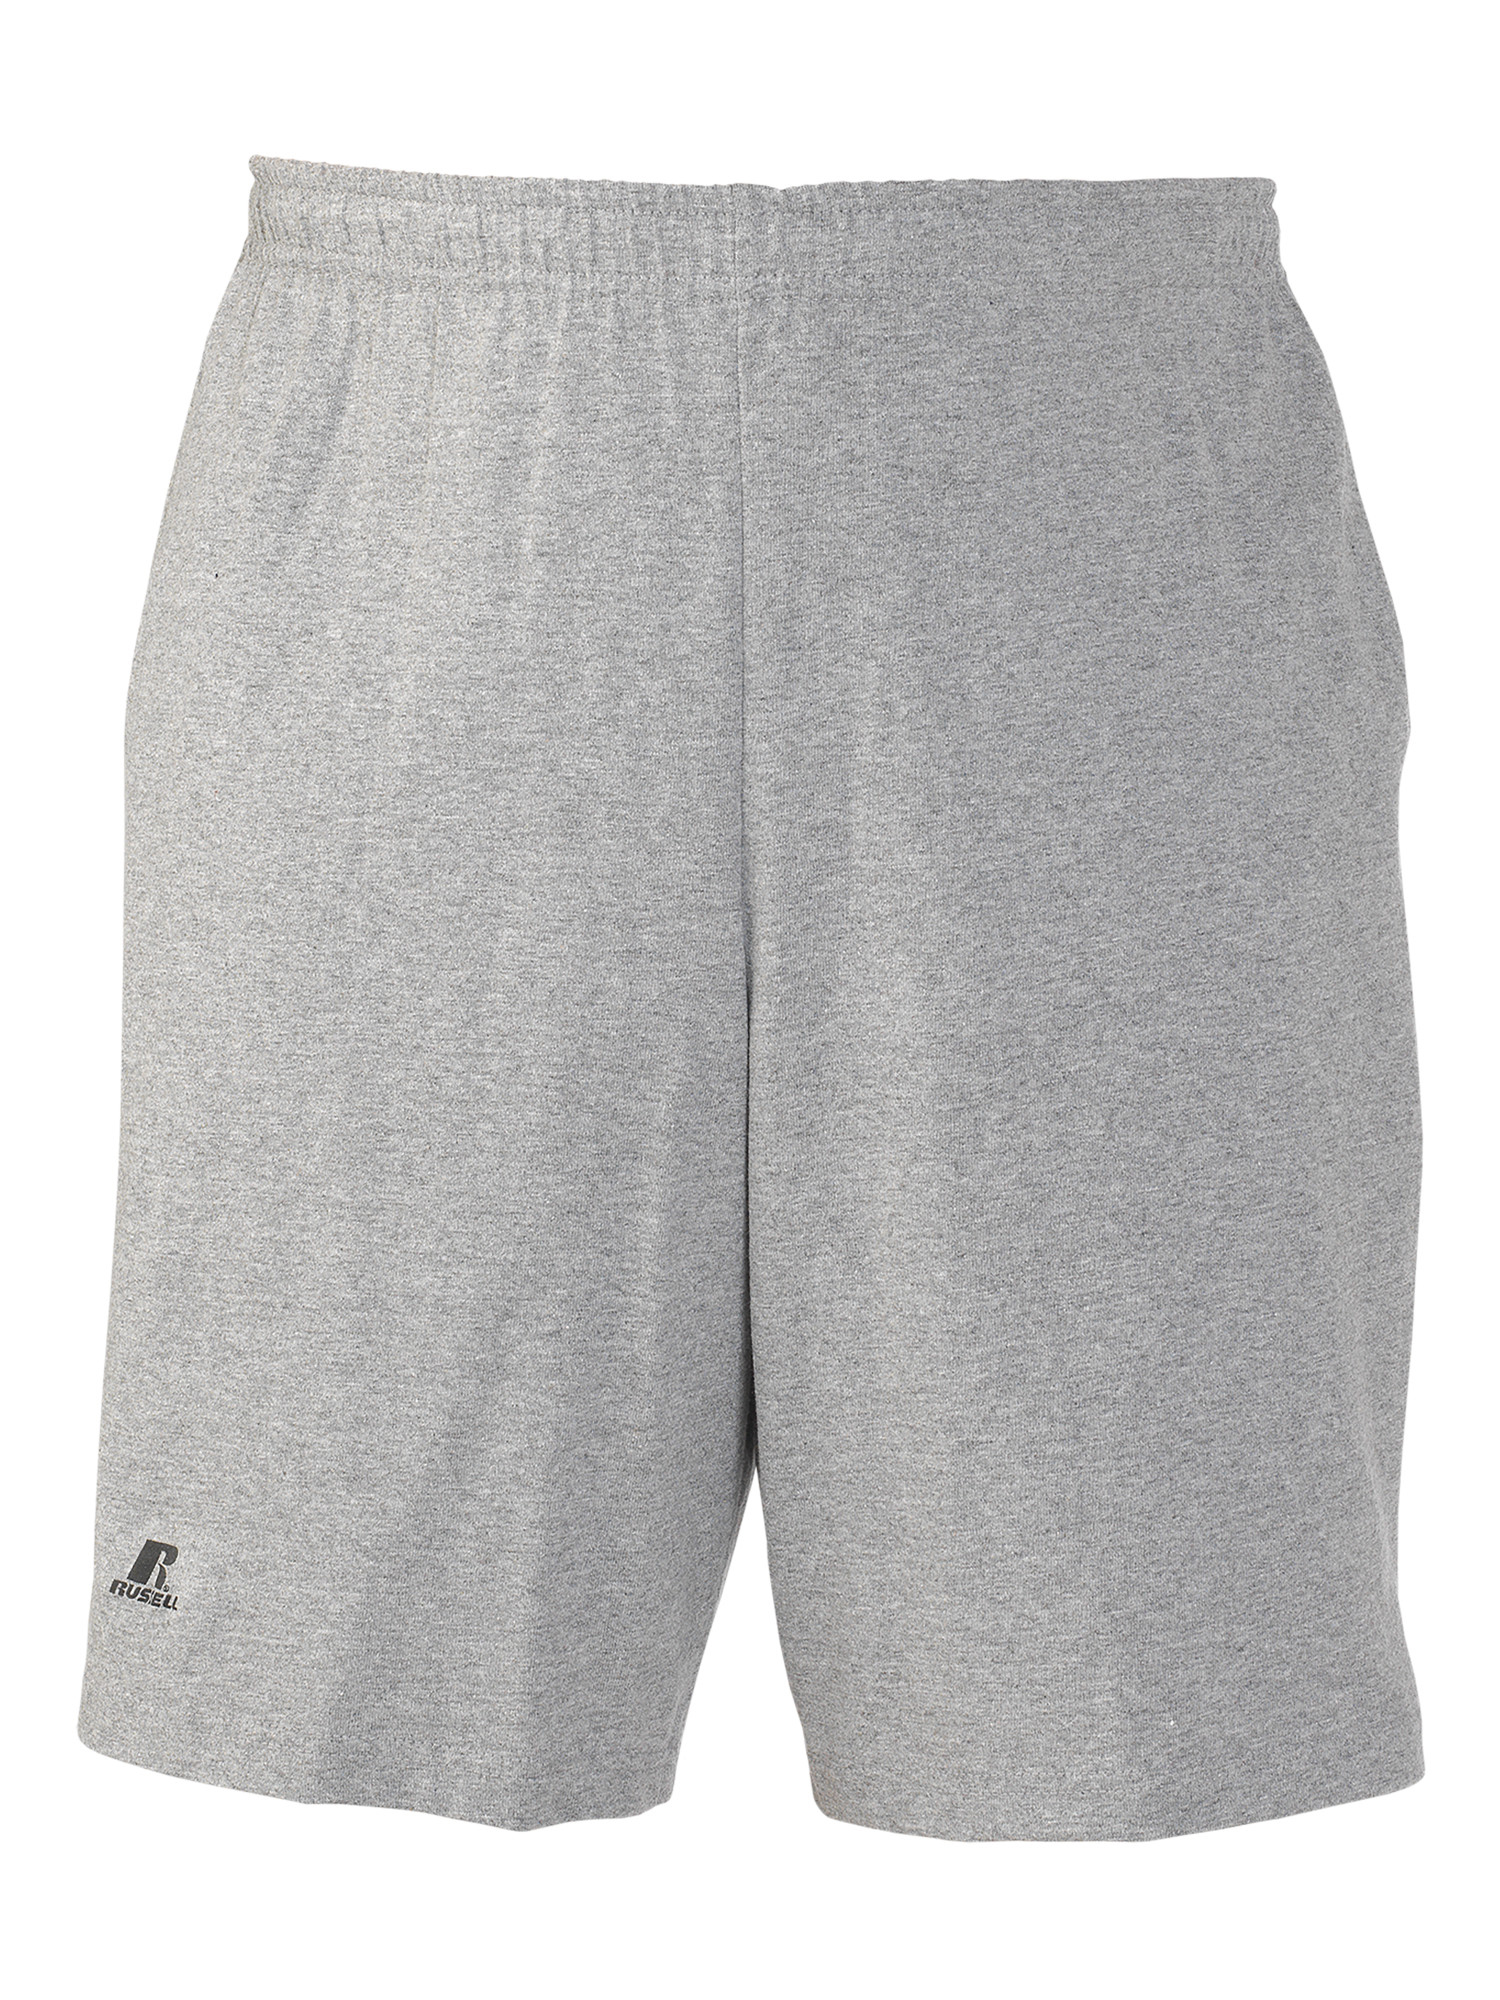 Russell Athletic Men's and Big Men's 9-10" Basic Cotton Pocket Shorts - image 5 of 5